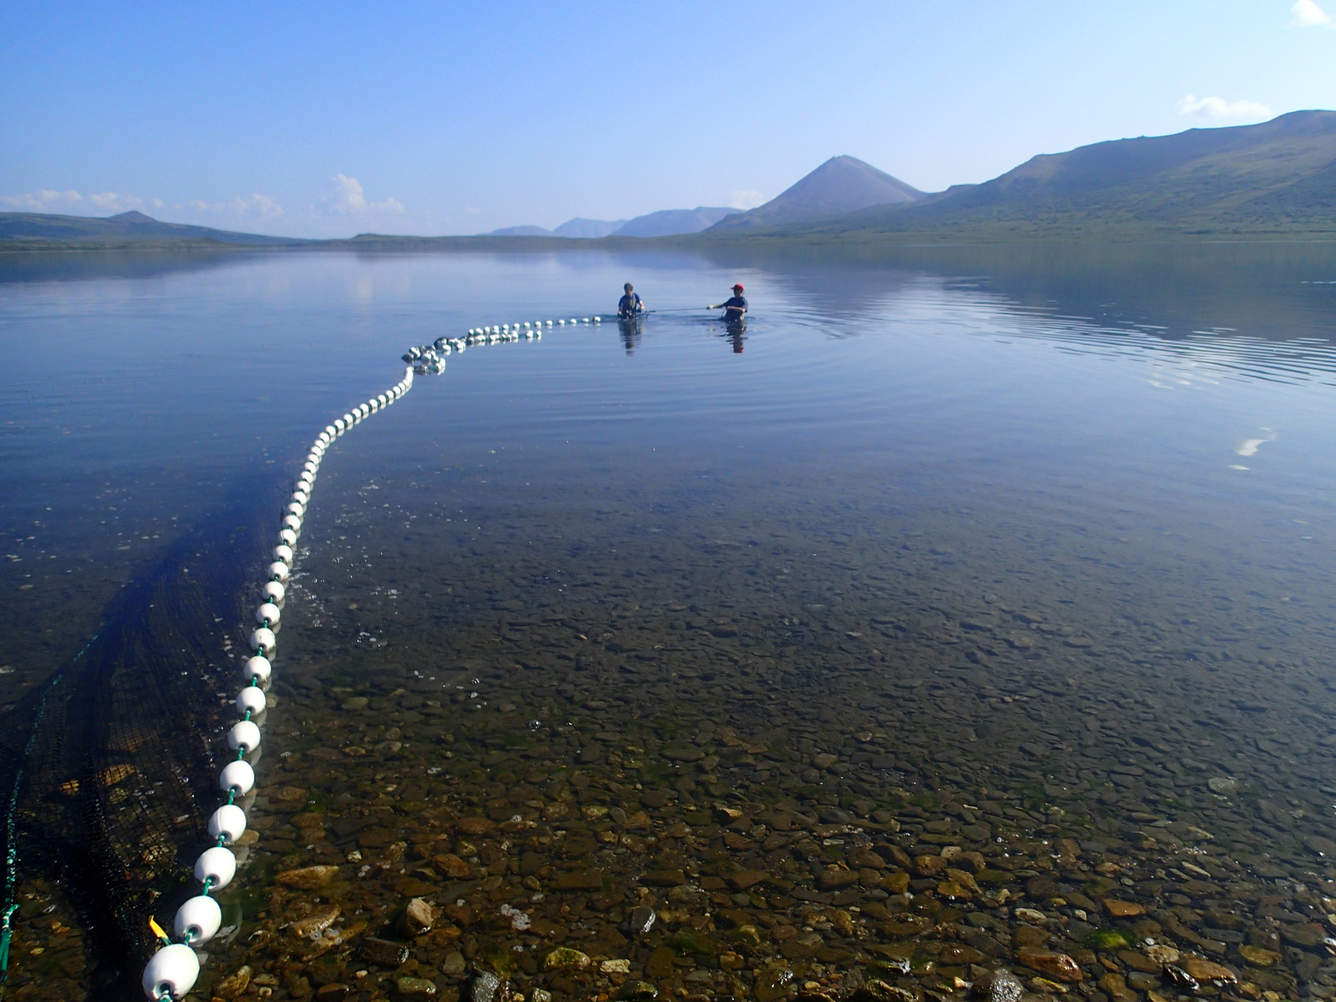 Two people pulling a beach seine net in Salmon Lake.